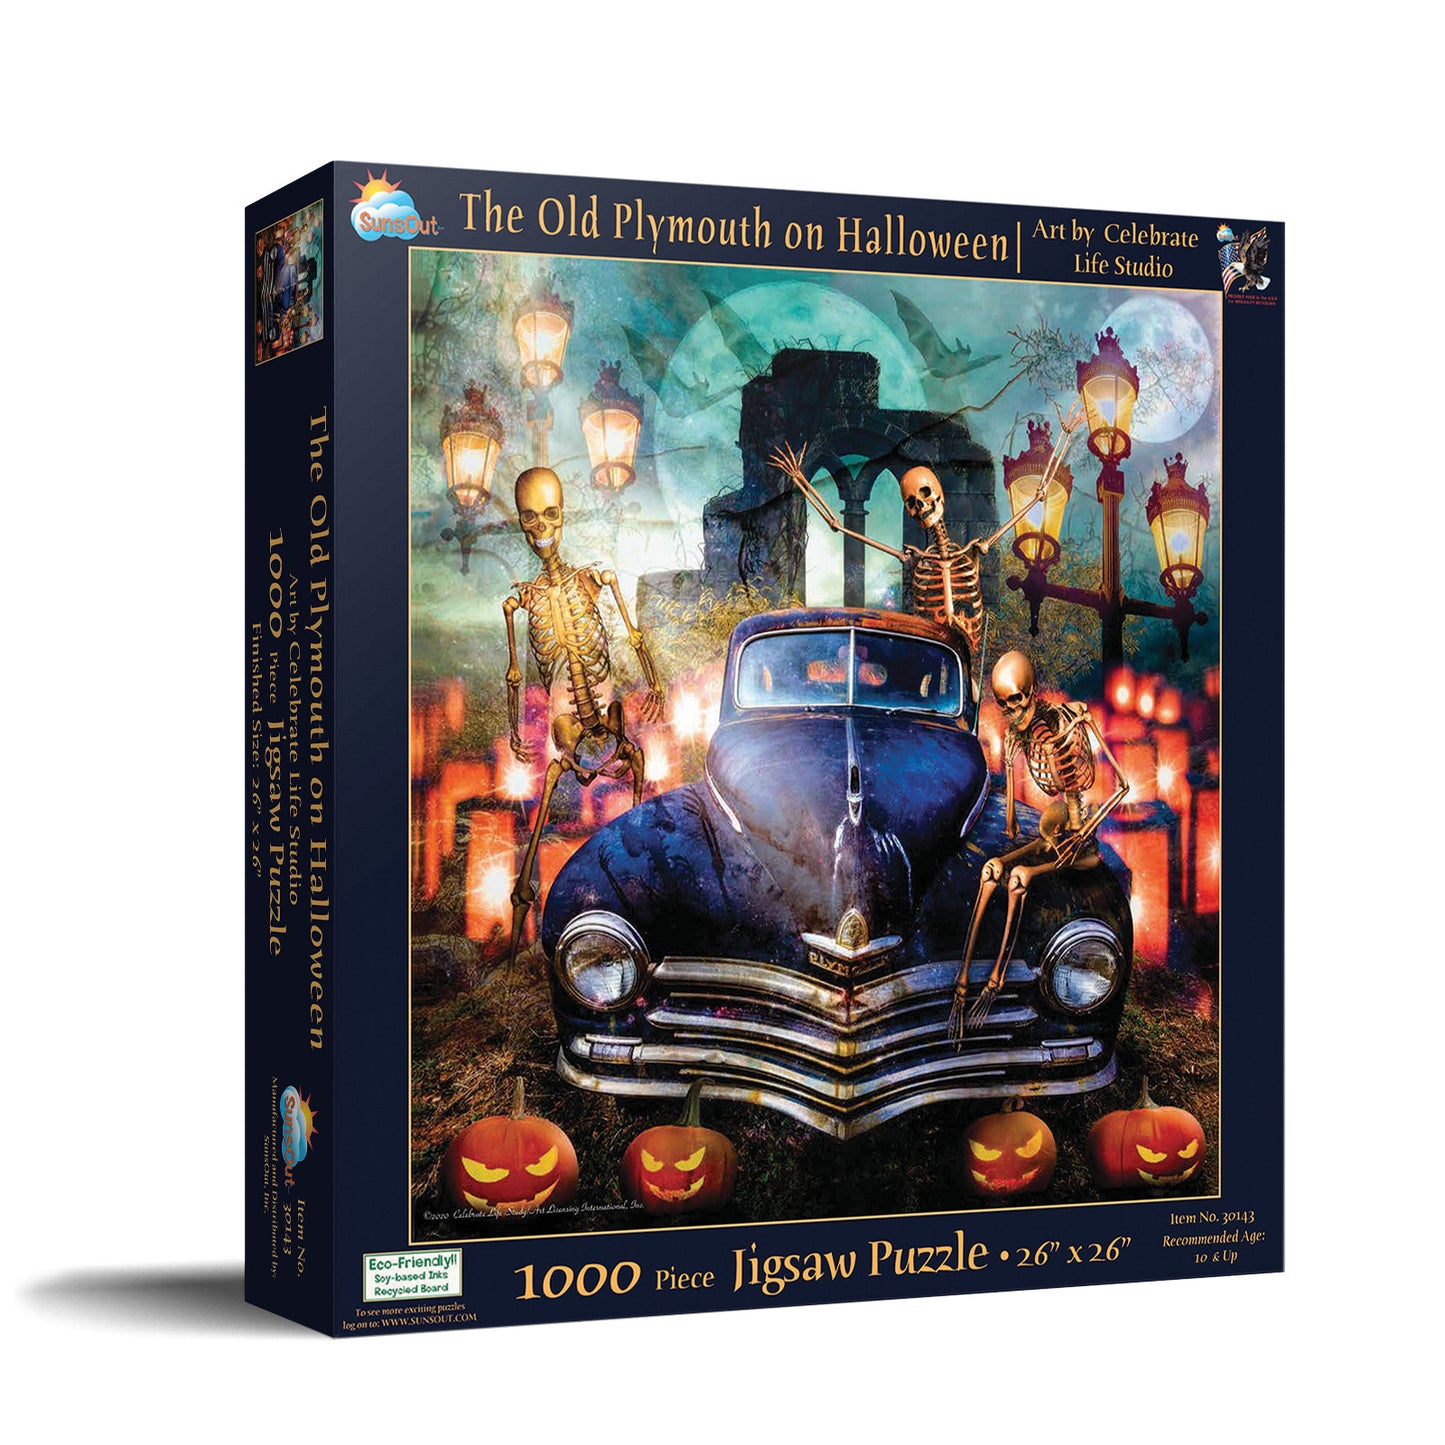 The Old Plymouth on Halloween - 1000 Piece Jigsaw Puzzle